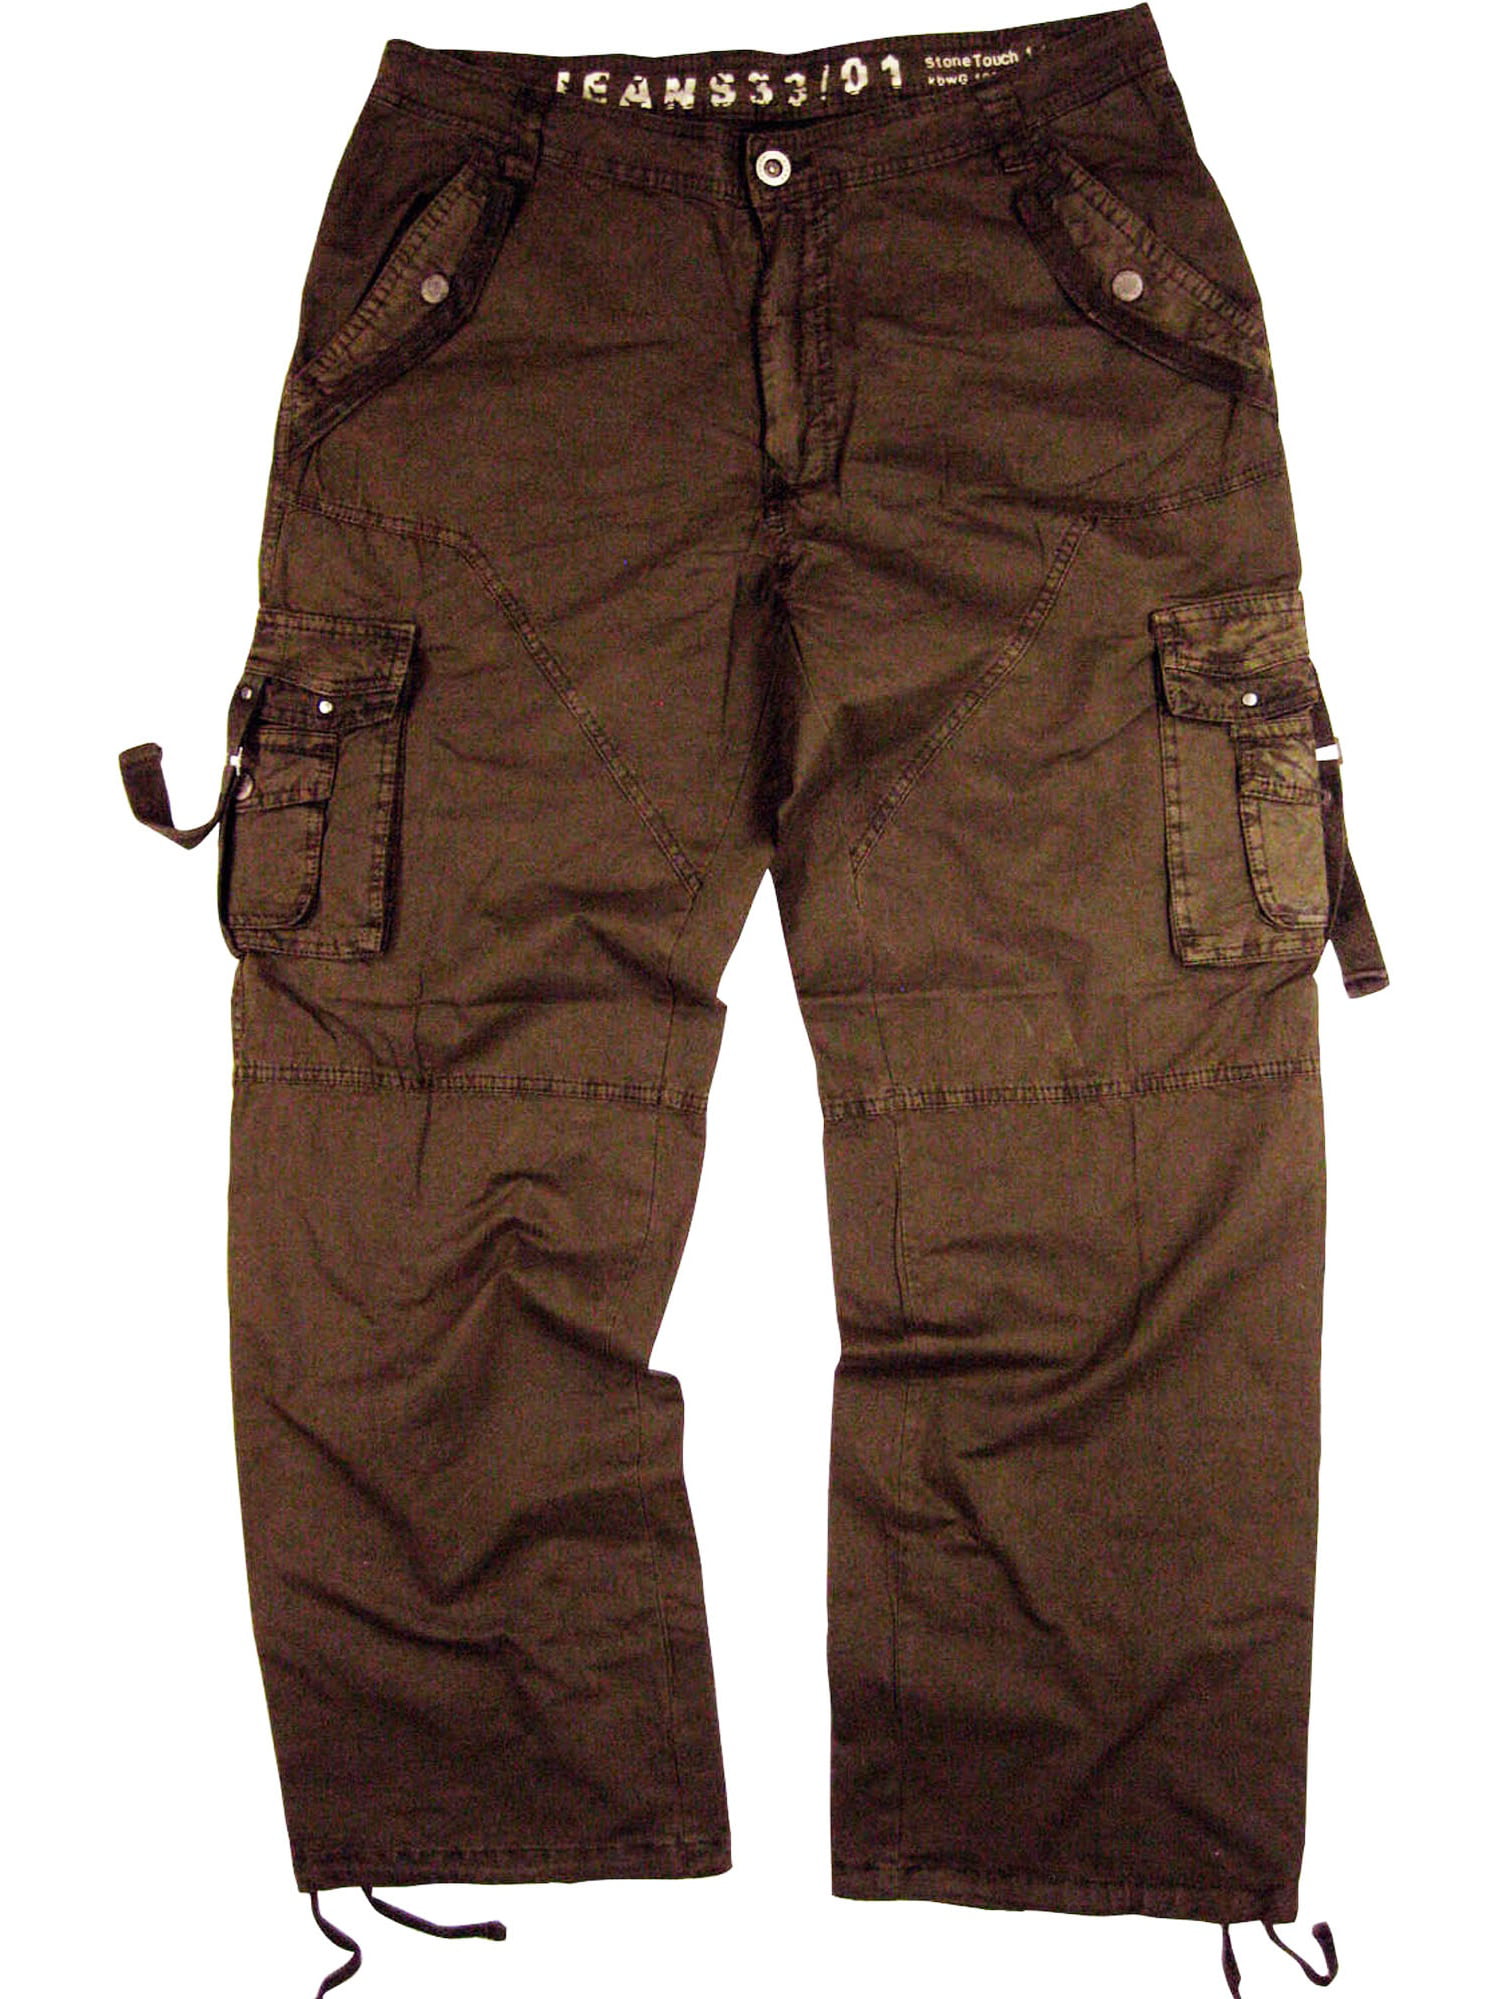 Stone Touch Jeans - StoneTouch Men's Military-Style Plus size Cargo